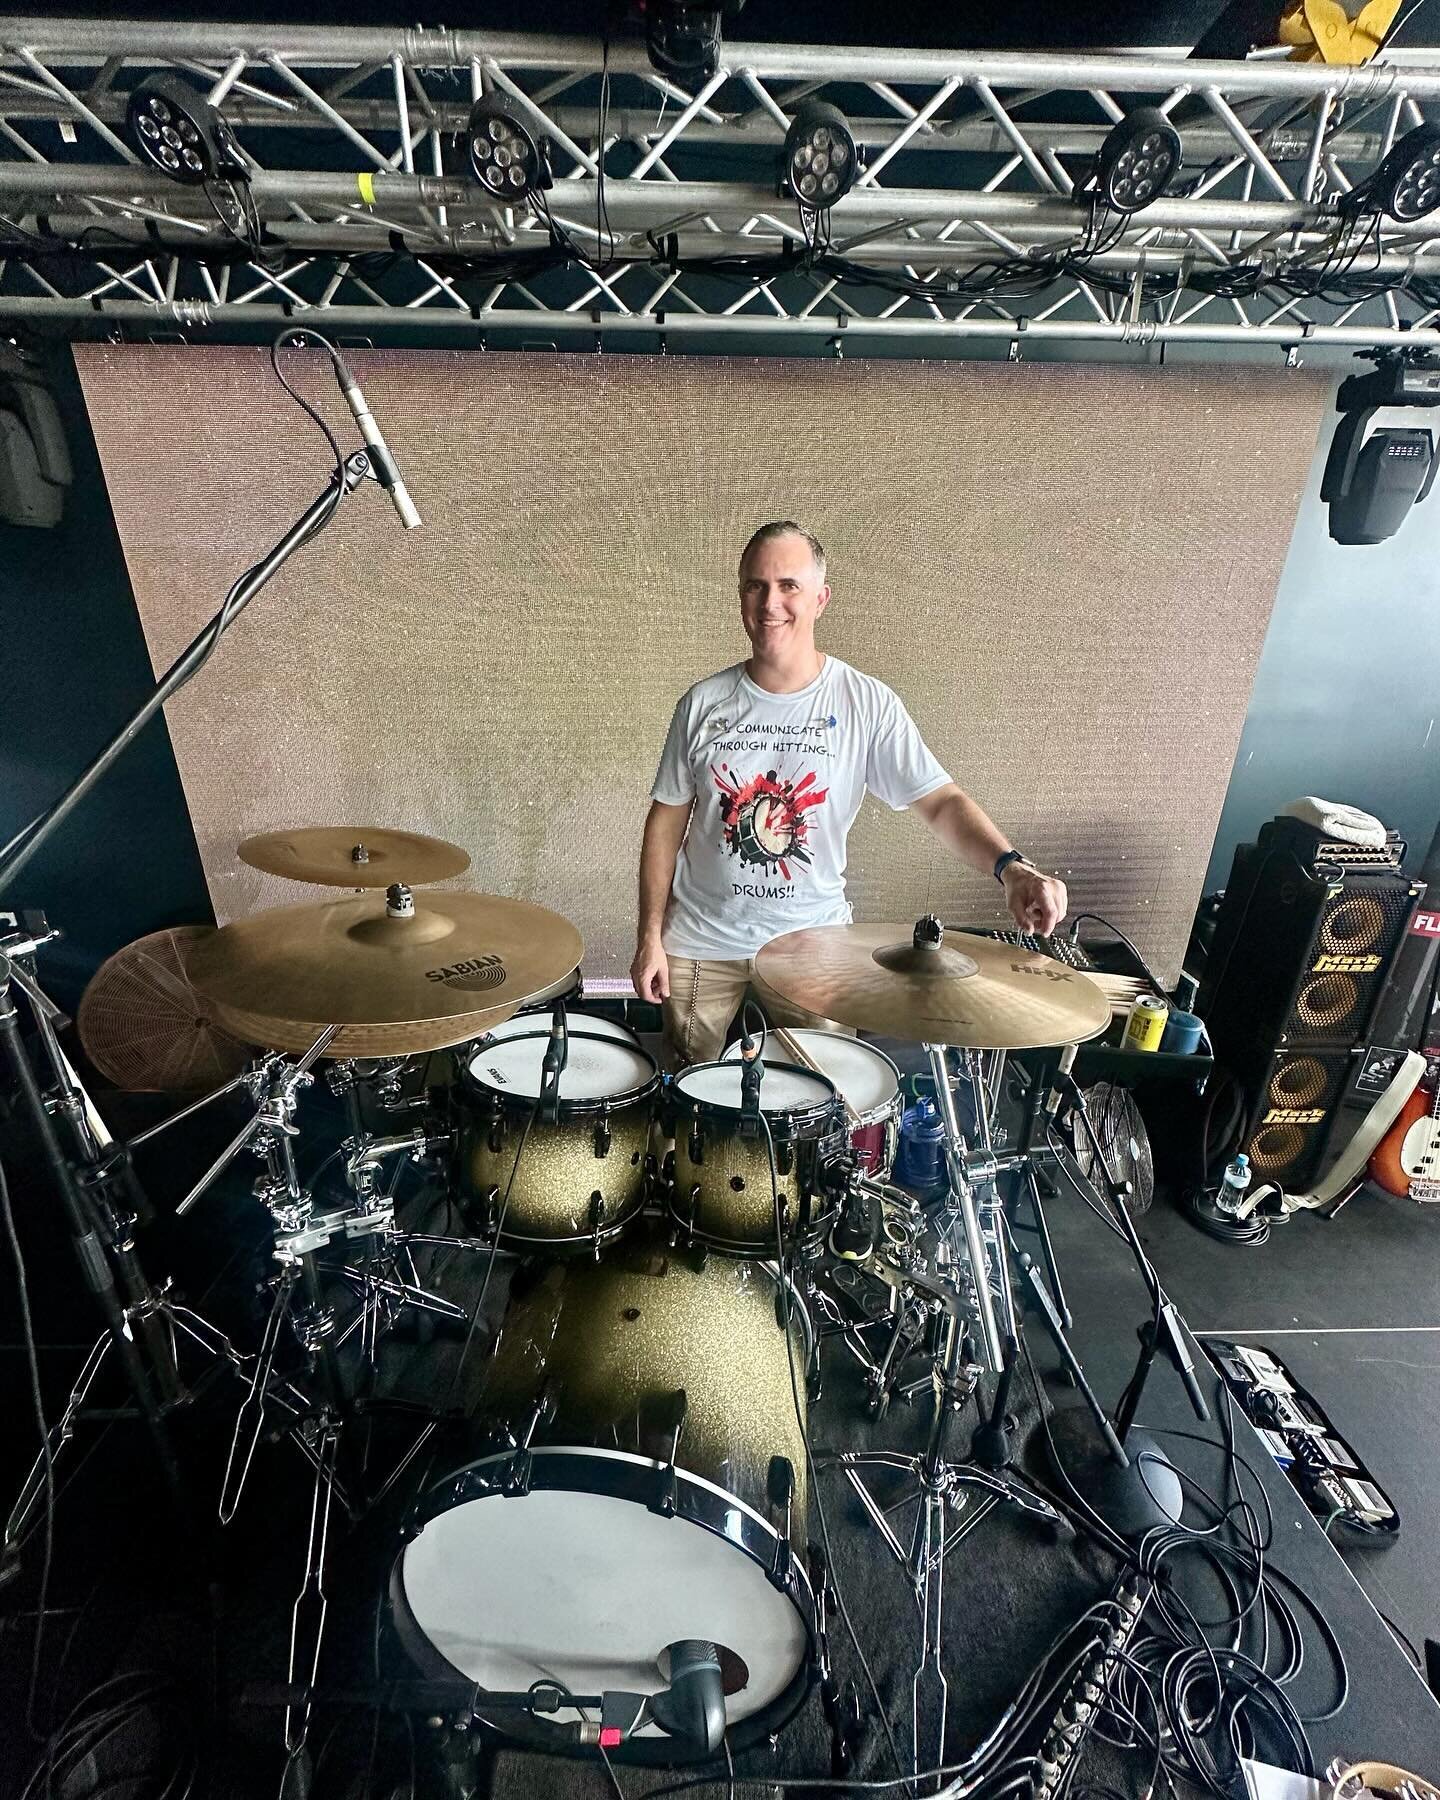 Show tonight in Gosford. Wearing another of my t-shirts, sweating through set up for #runningintheshadowsfleetwoodmacshow t-shirt here: https://shop.spitster.com.au/products/i-communicate-through-hitting-drums-as-colour-organic-tee #drums #drum #drum